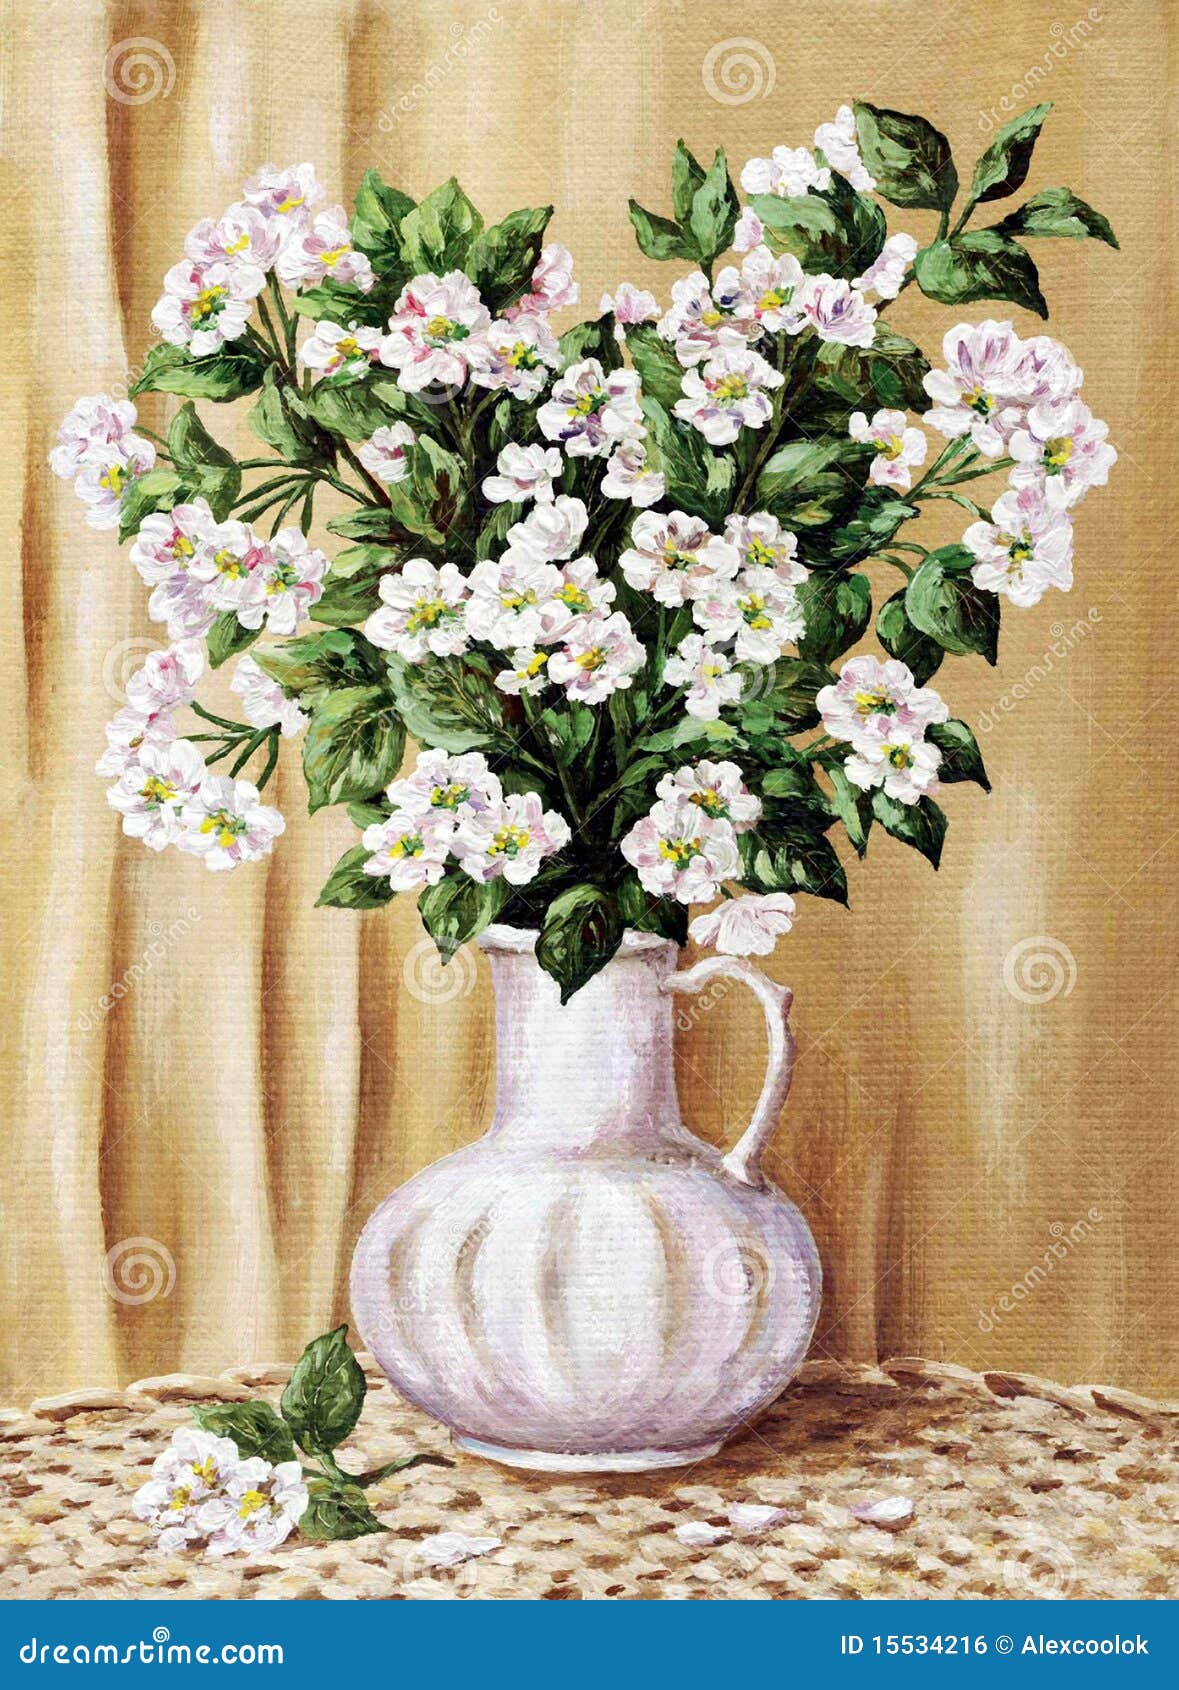 blossoming apple-tree in a white jug